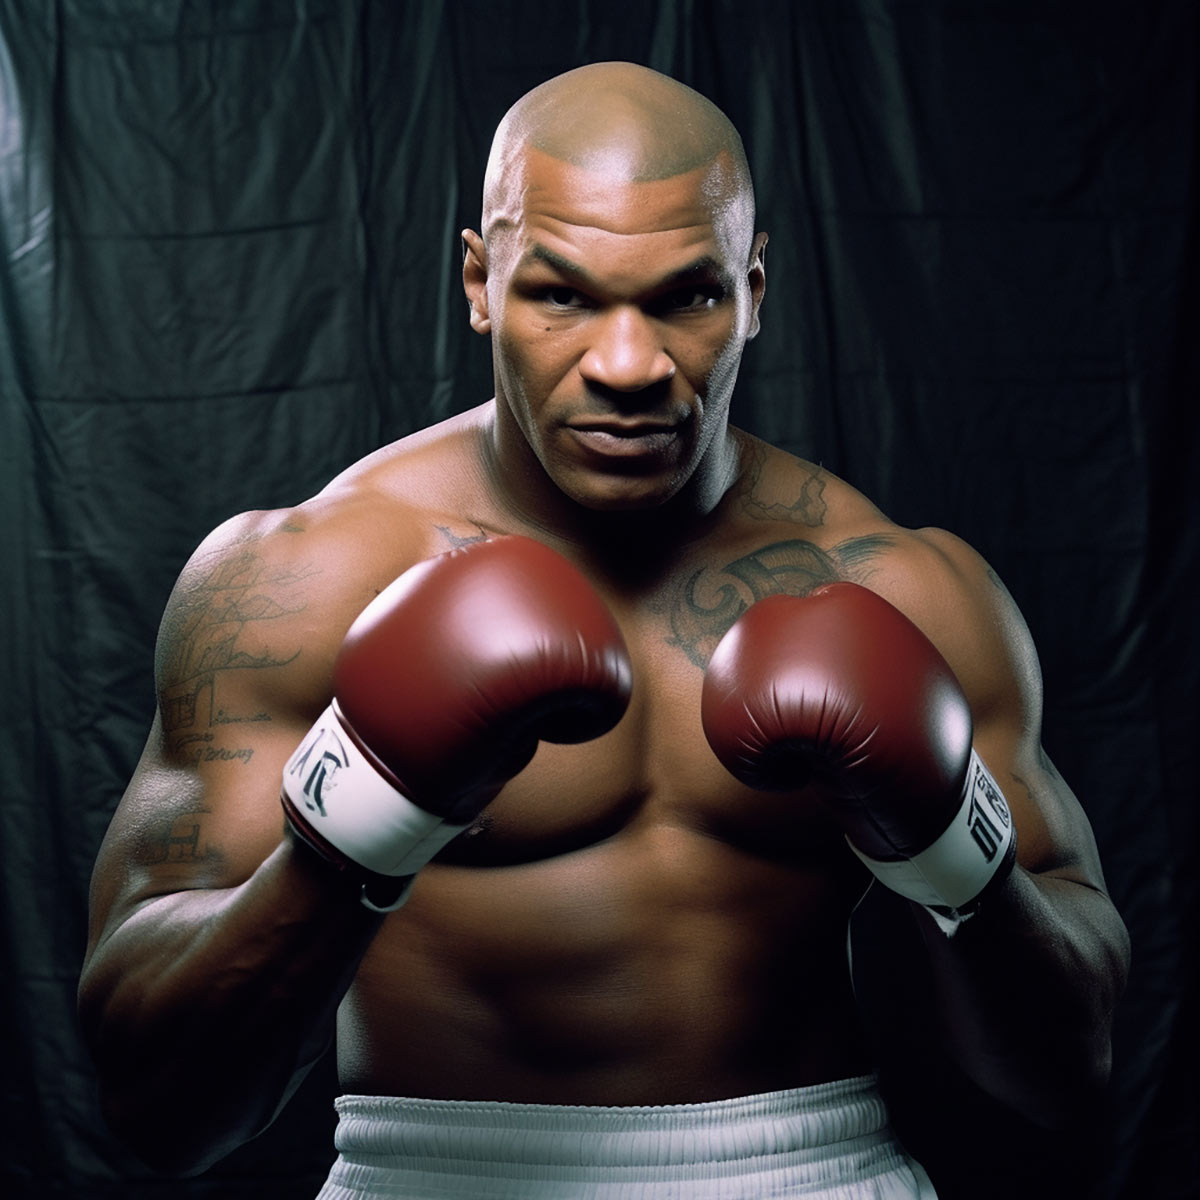 Photo of Mike Tyson created with Artificial Intelligence Midjourney